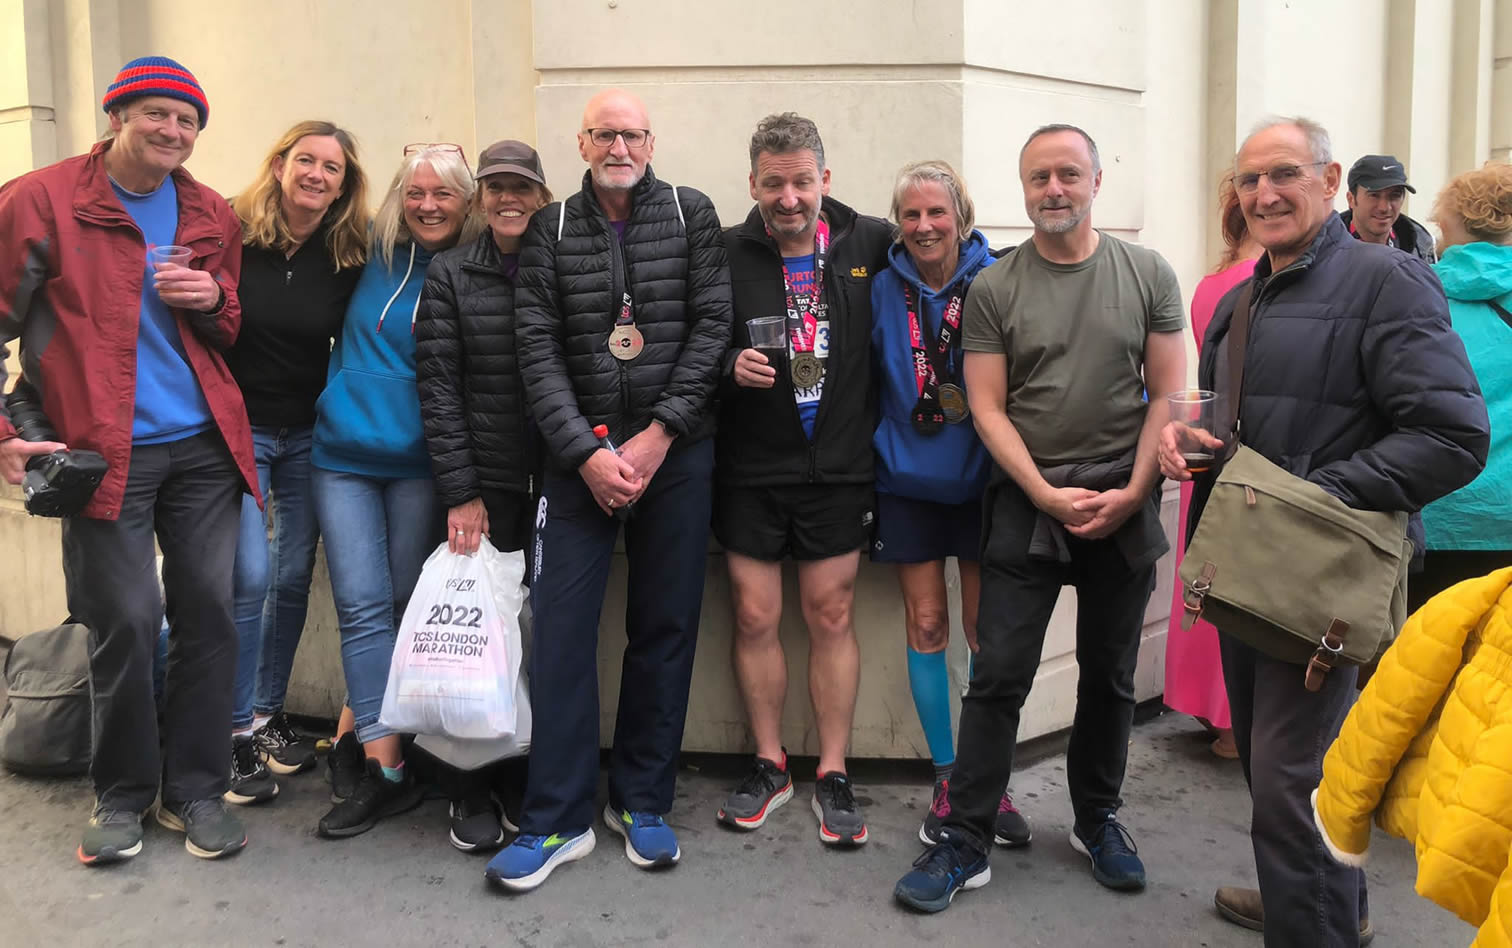 Bourton's runners and supporters at London Marathon - 2nd October 2022